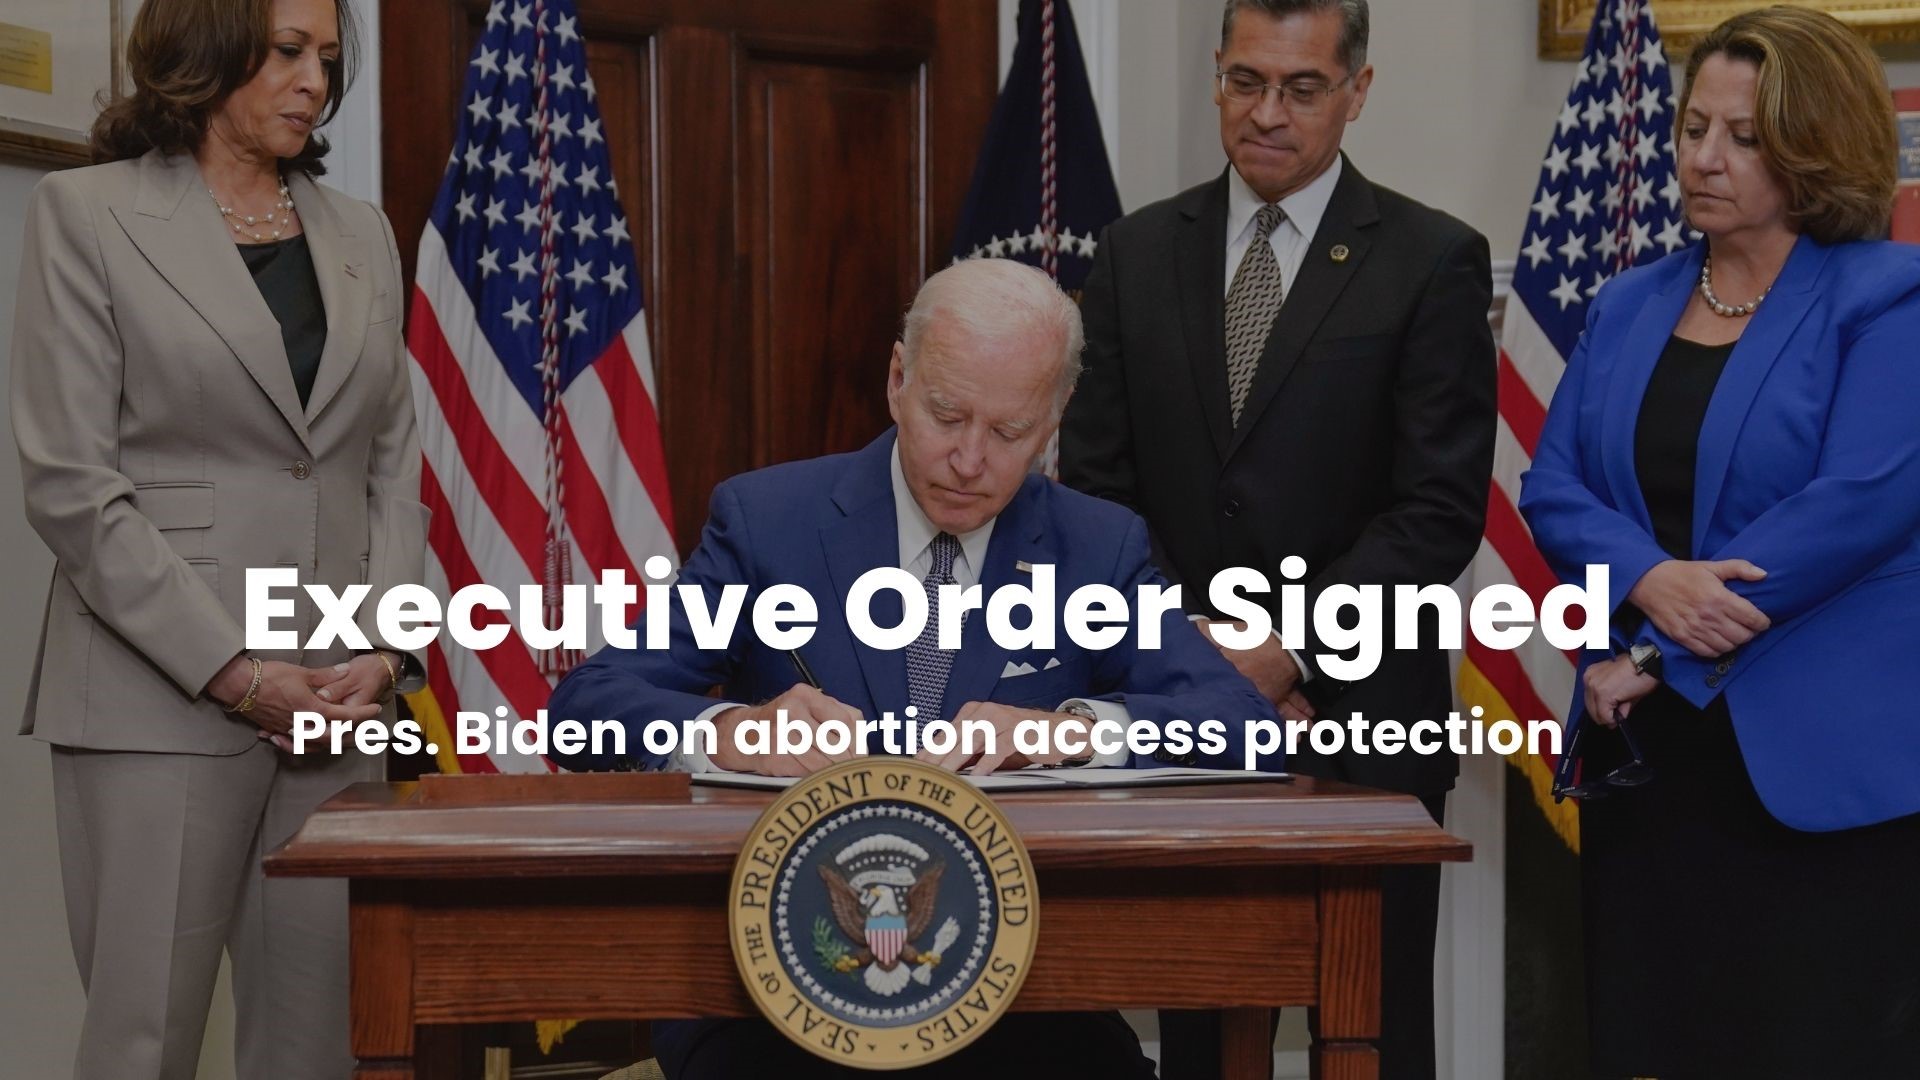 President Biden speaks on abortion access nationwide and signs an executive order as a first step toward protection.